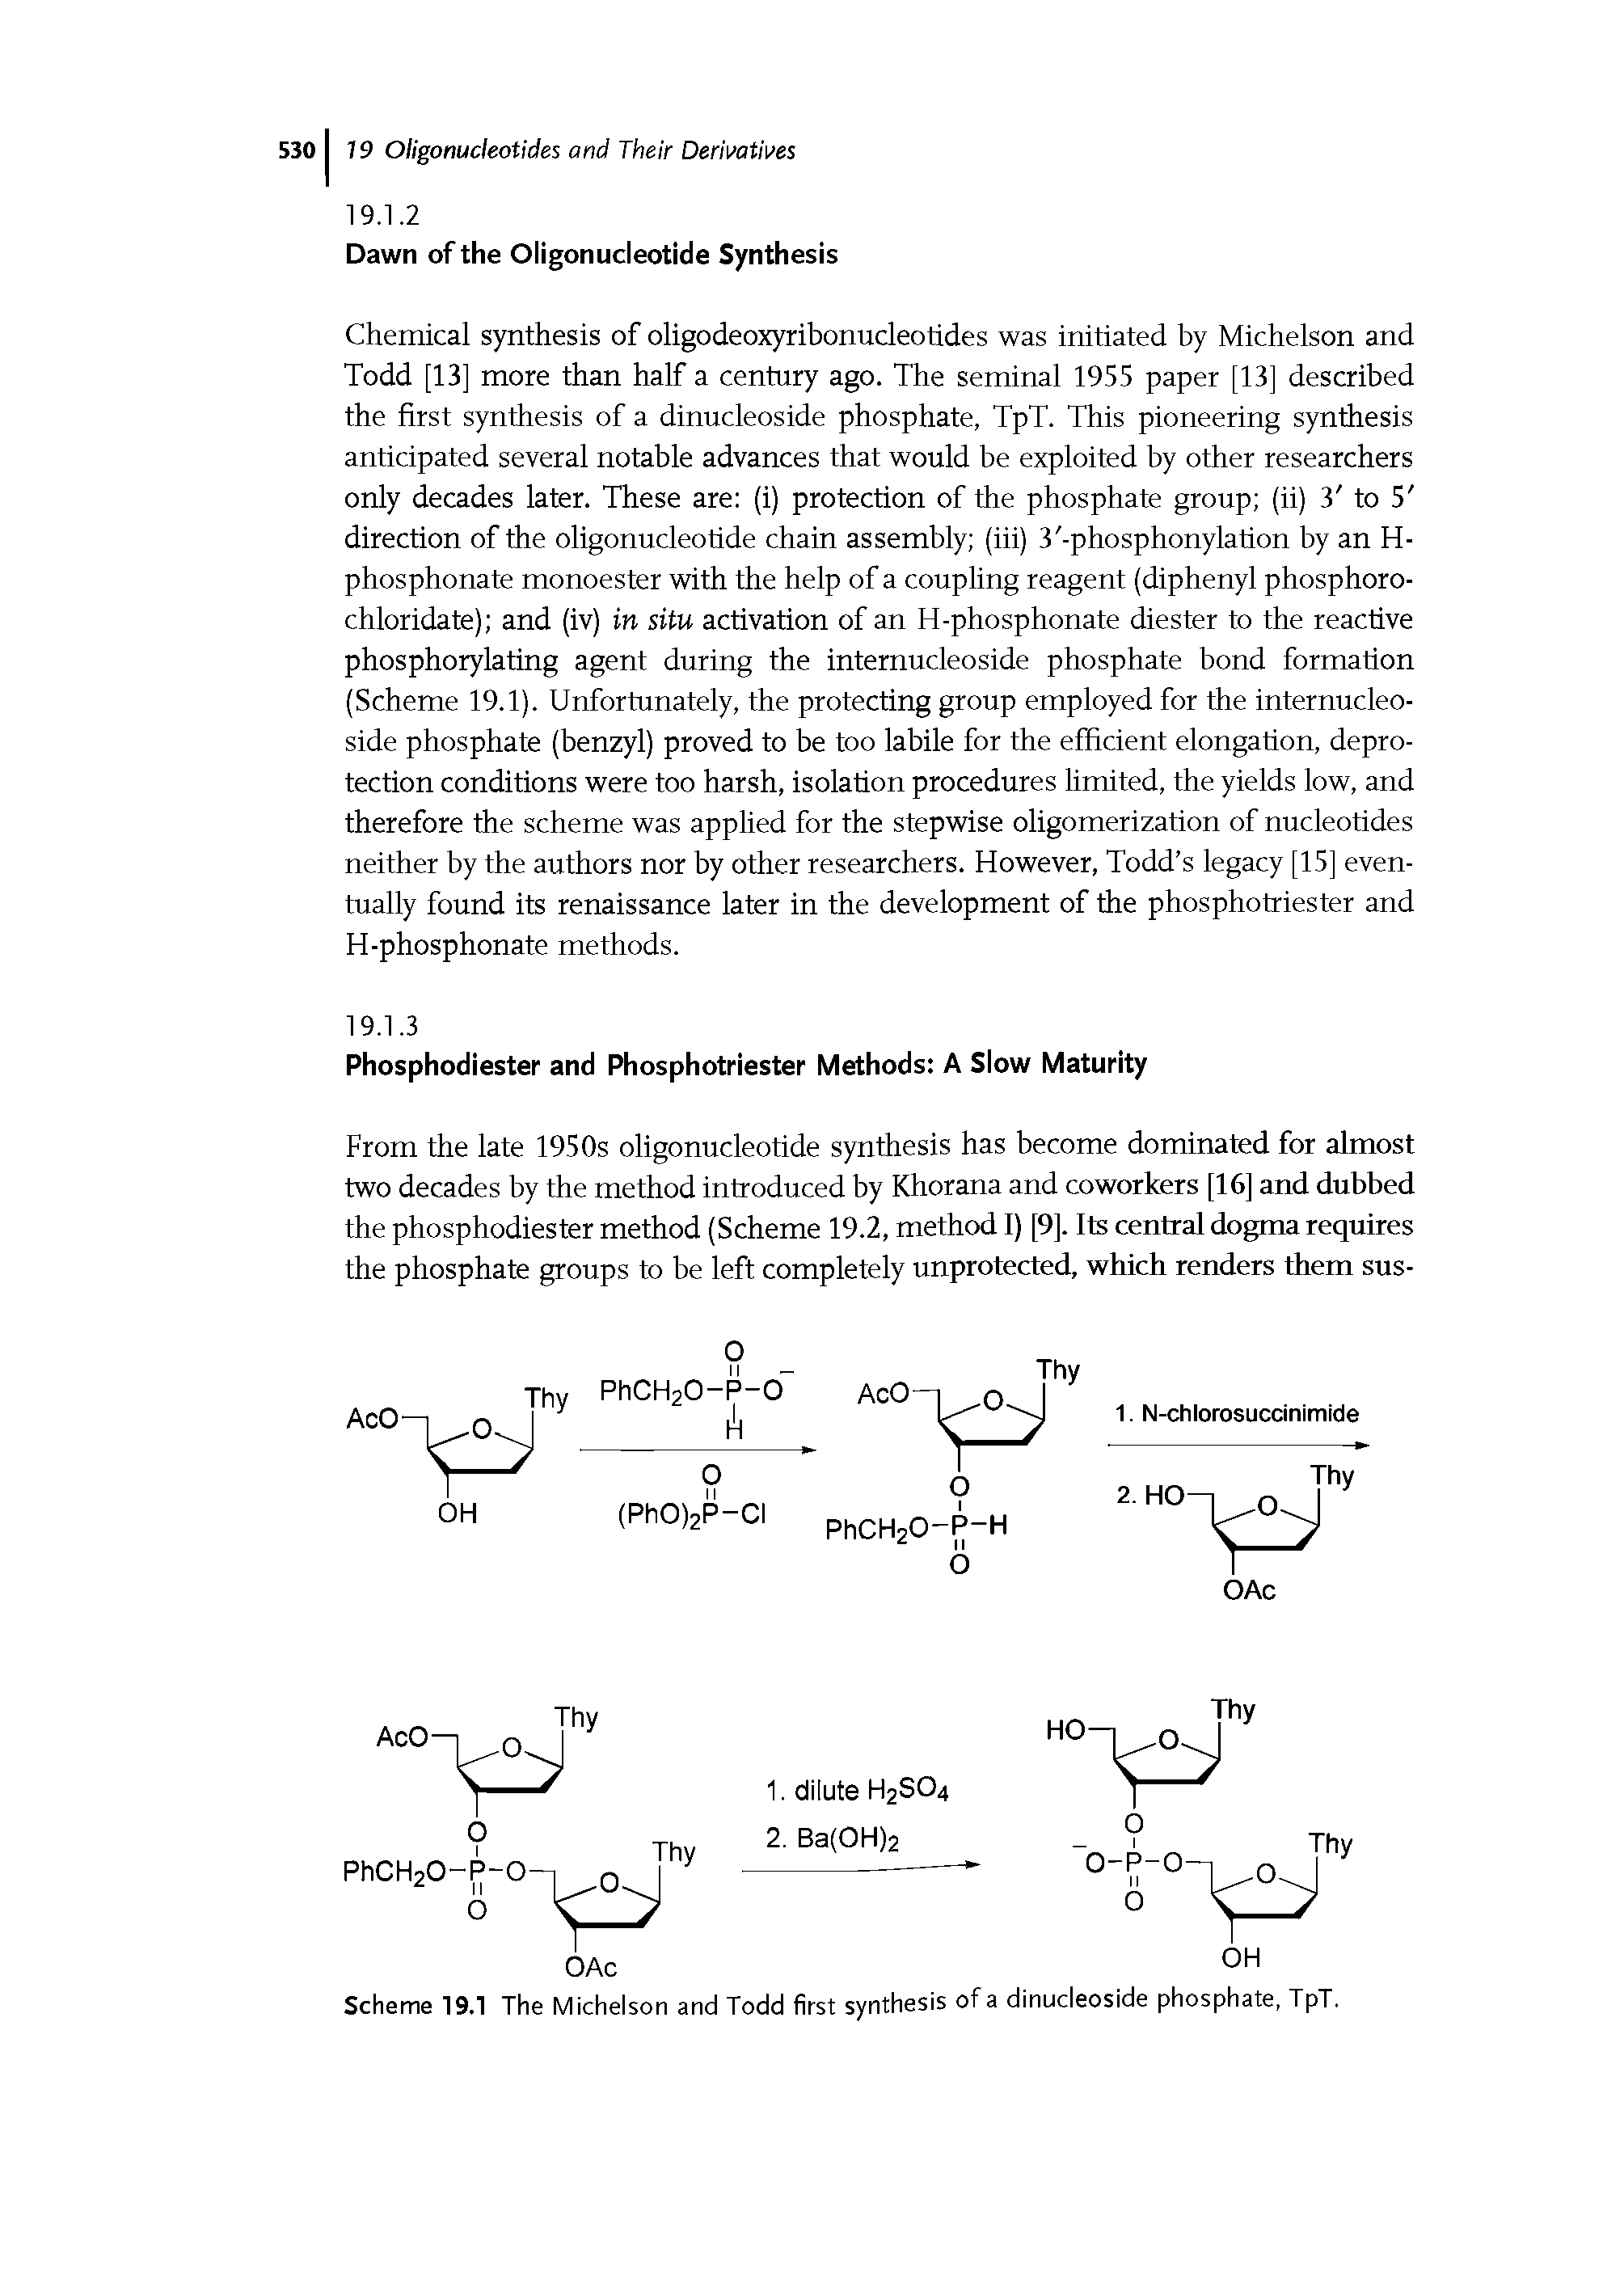 Scheme 19.1 The Michelson and Todd first synthesis of a dinucleoside phosphate, TpT.